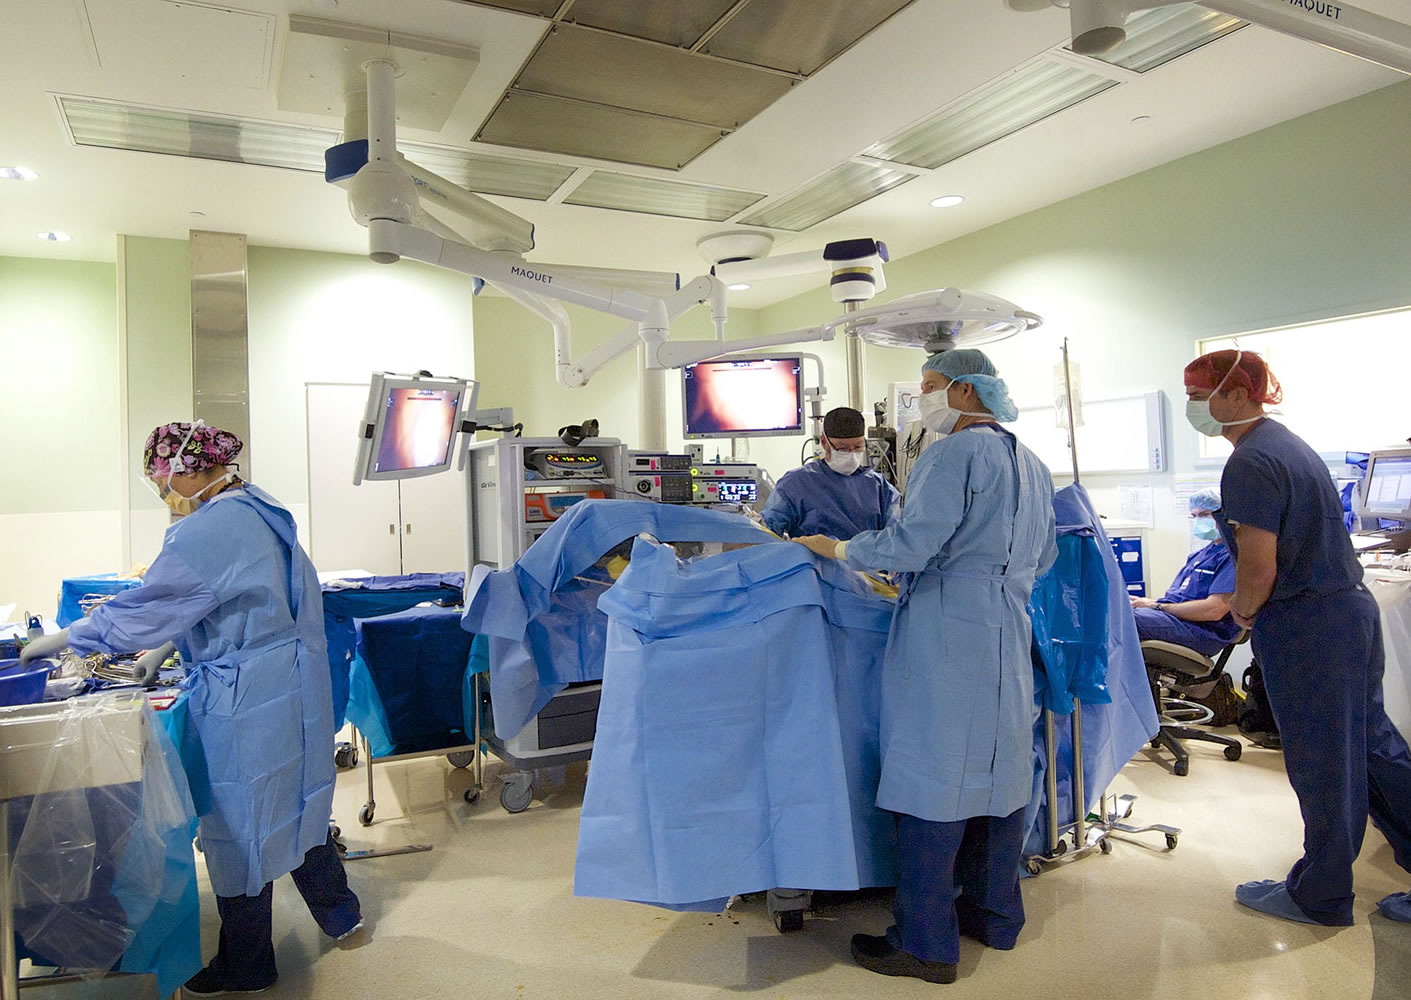 Dr. Scott Rushing, center, prepares a 51-year-old patient for a single-site hysterectomy Wednesday in an operating room at PeaceHealth Southwest Medical Center. The single-site surgery uses only one incision -- a 2-centimeter incision in the belly button -- and leaves no visible scar.